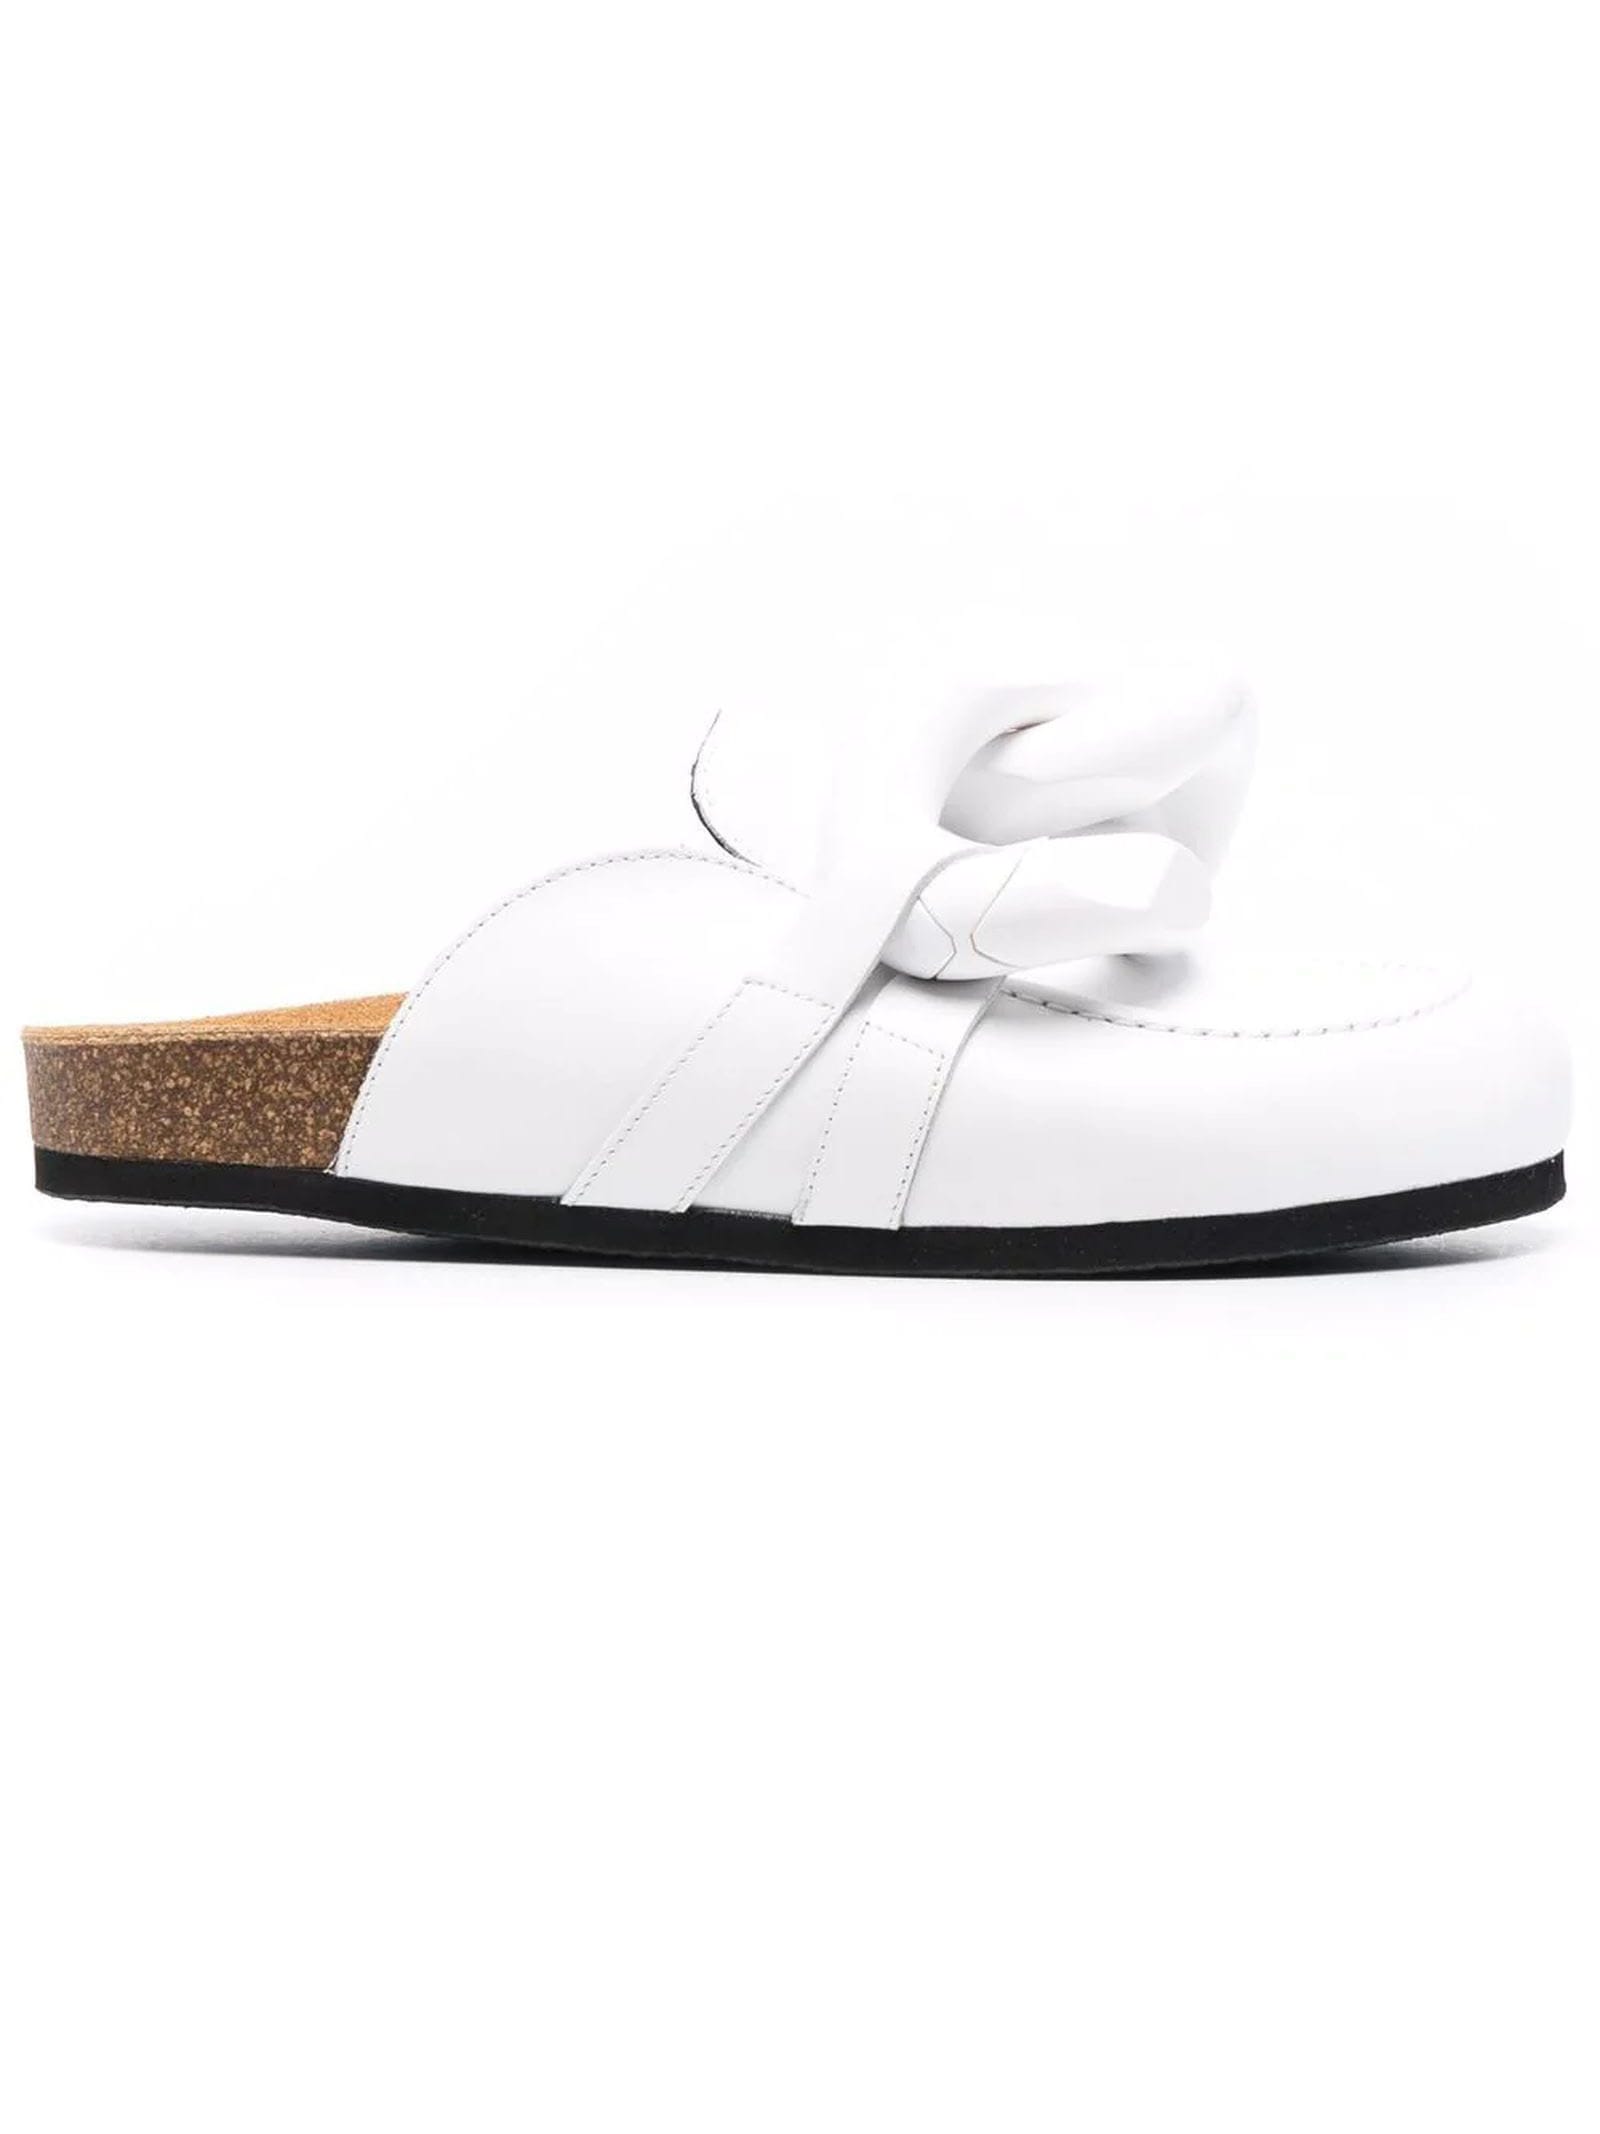 J.W. Anderson White Leather Mules